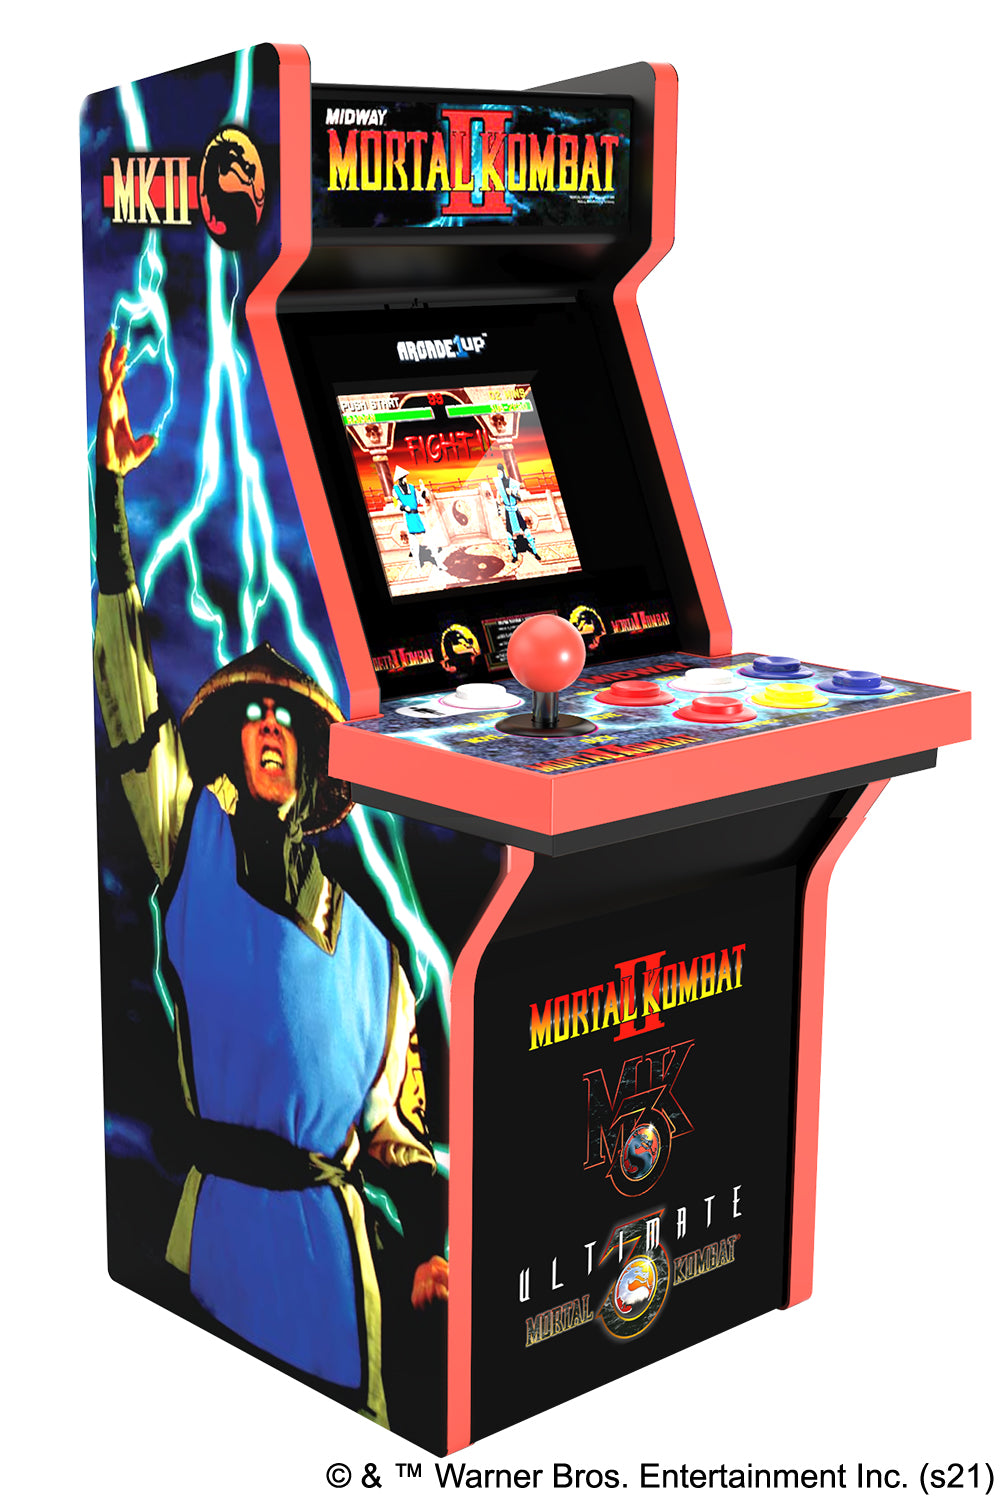 Arcade1Up Official 